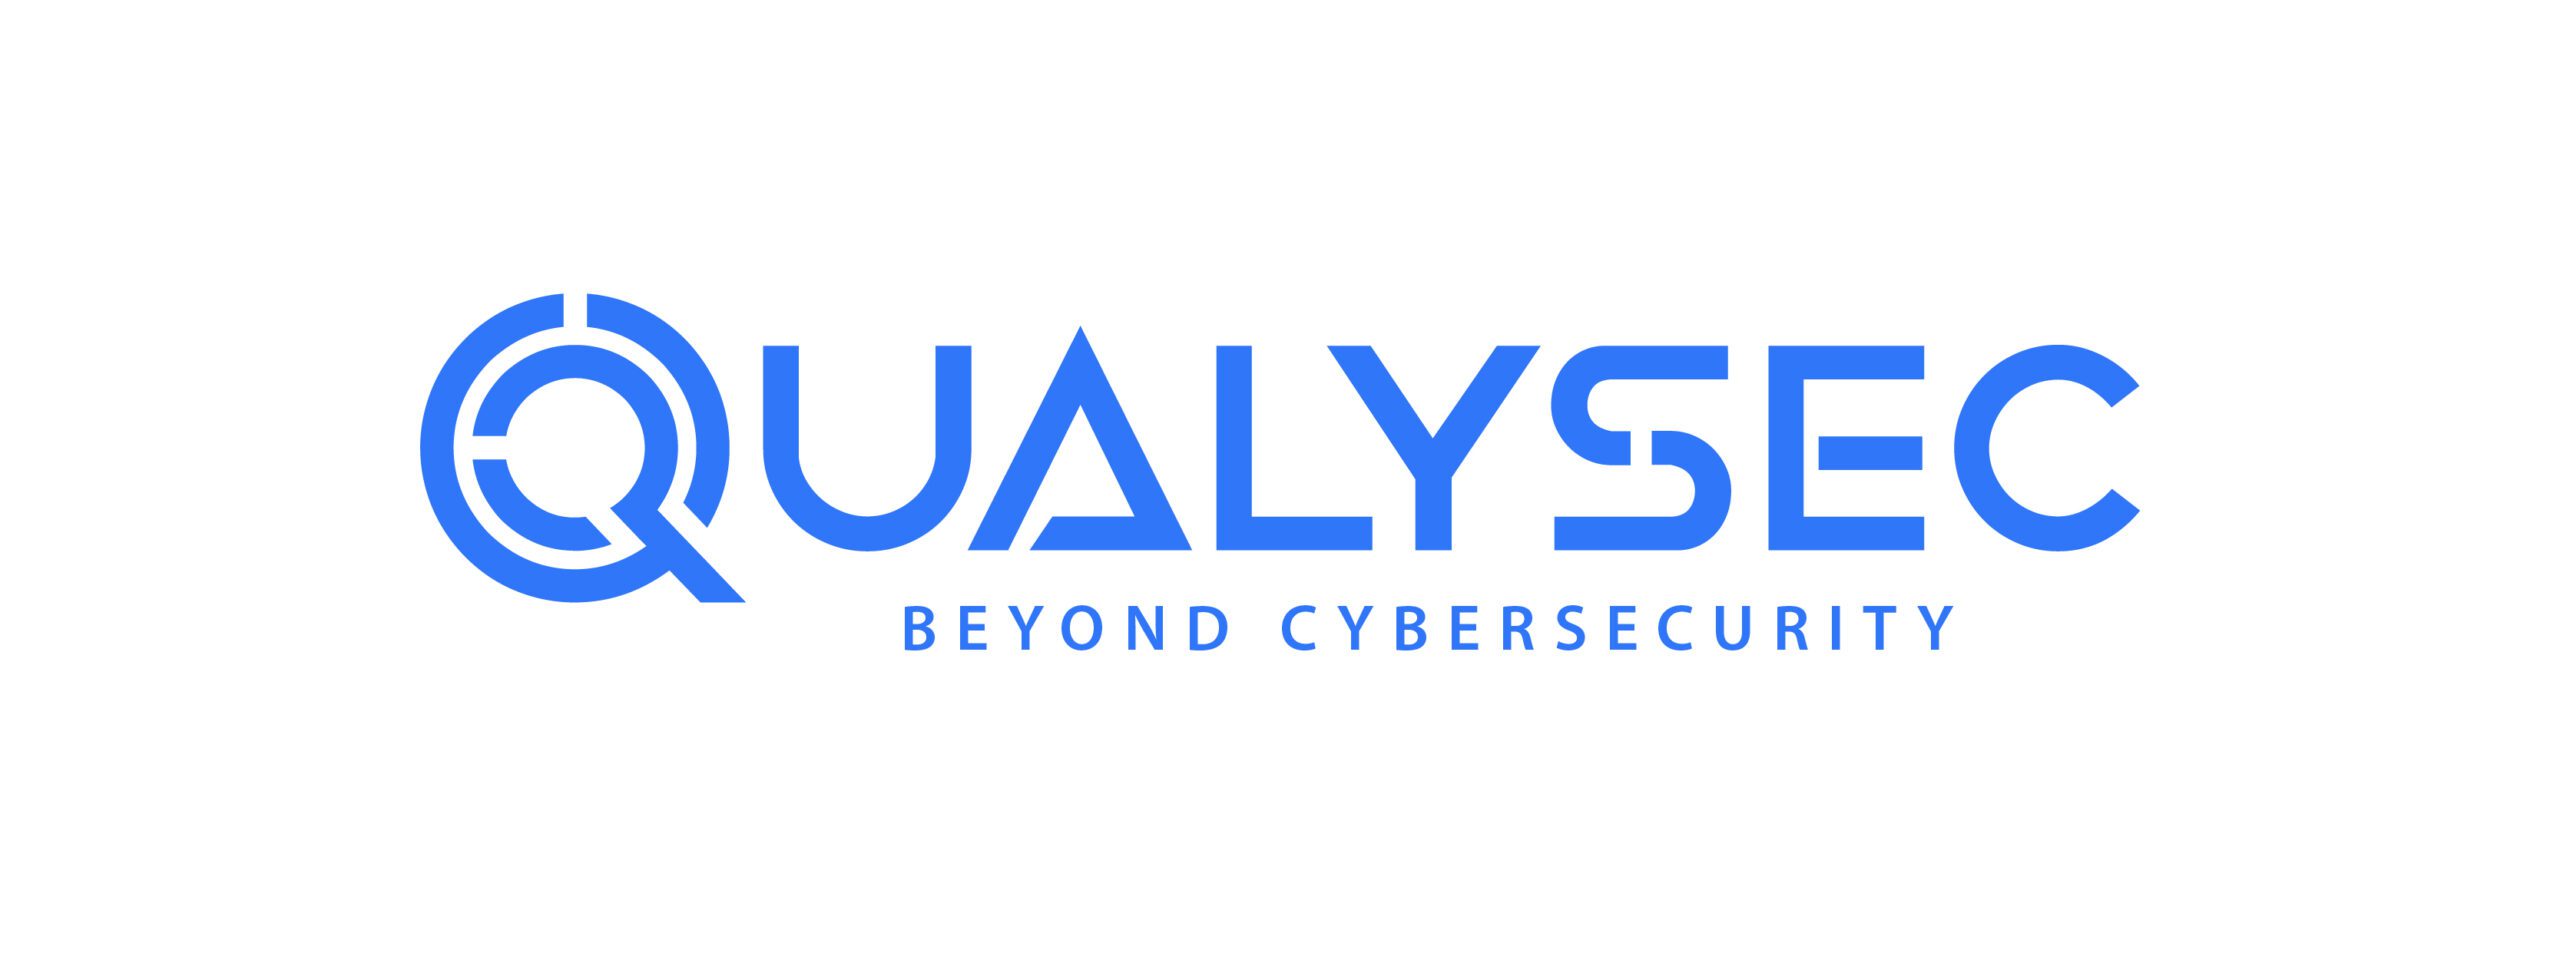 About Qualysec Penetration Testing Company